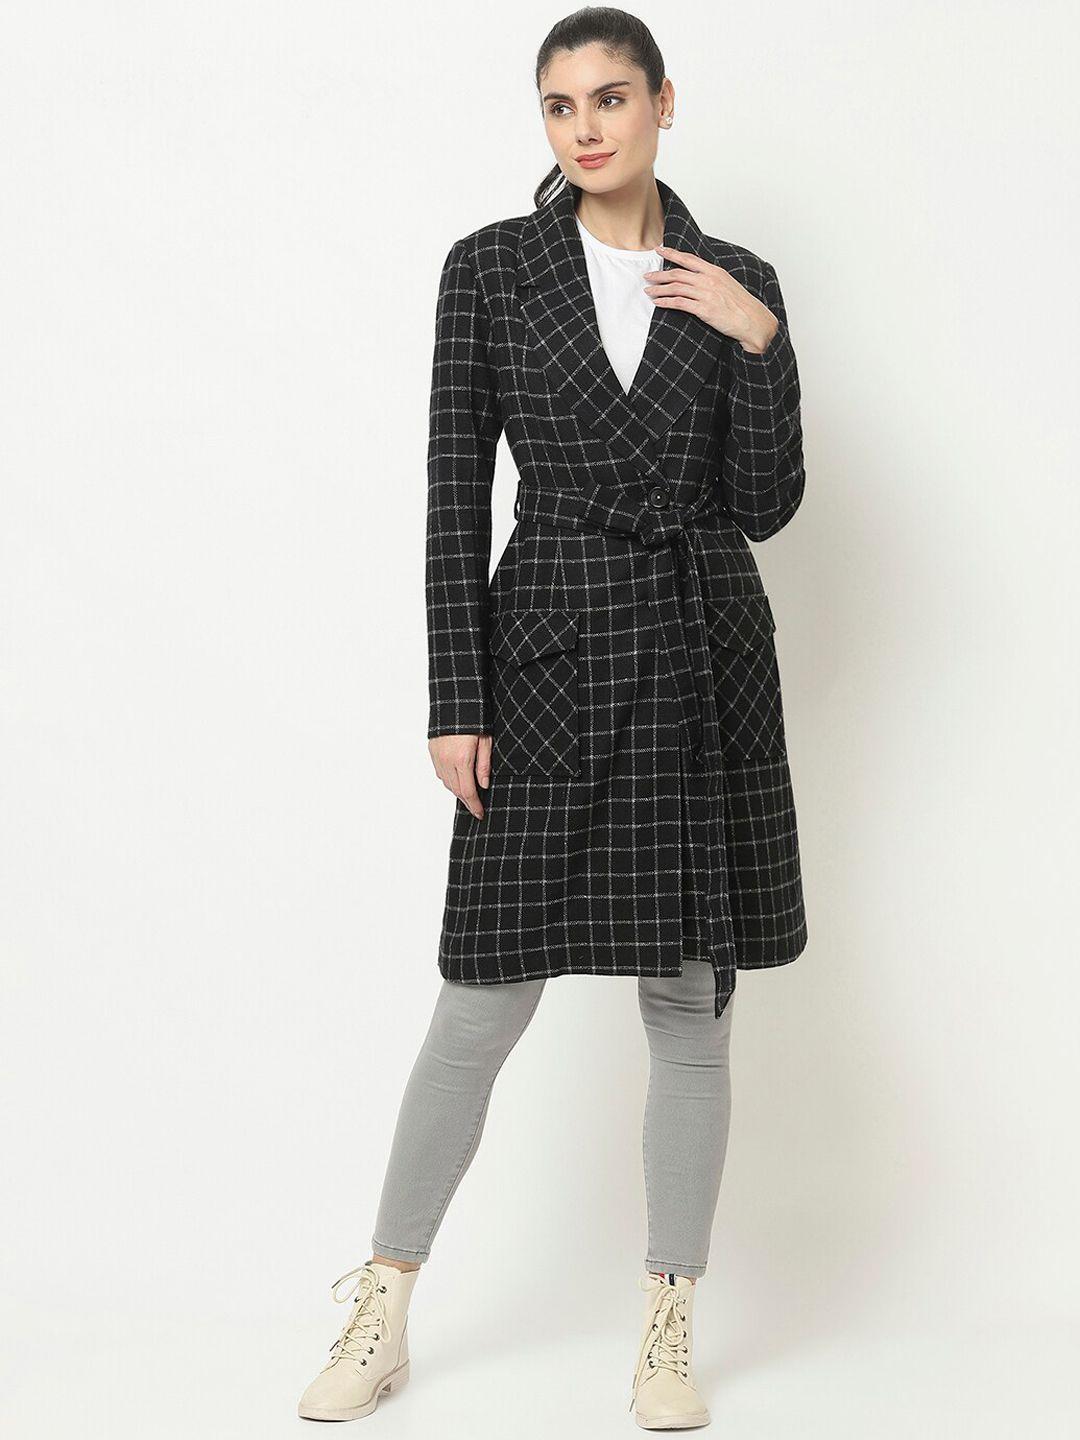 owncraft women black & white checked  single-breasted woolen trench coat with belt